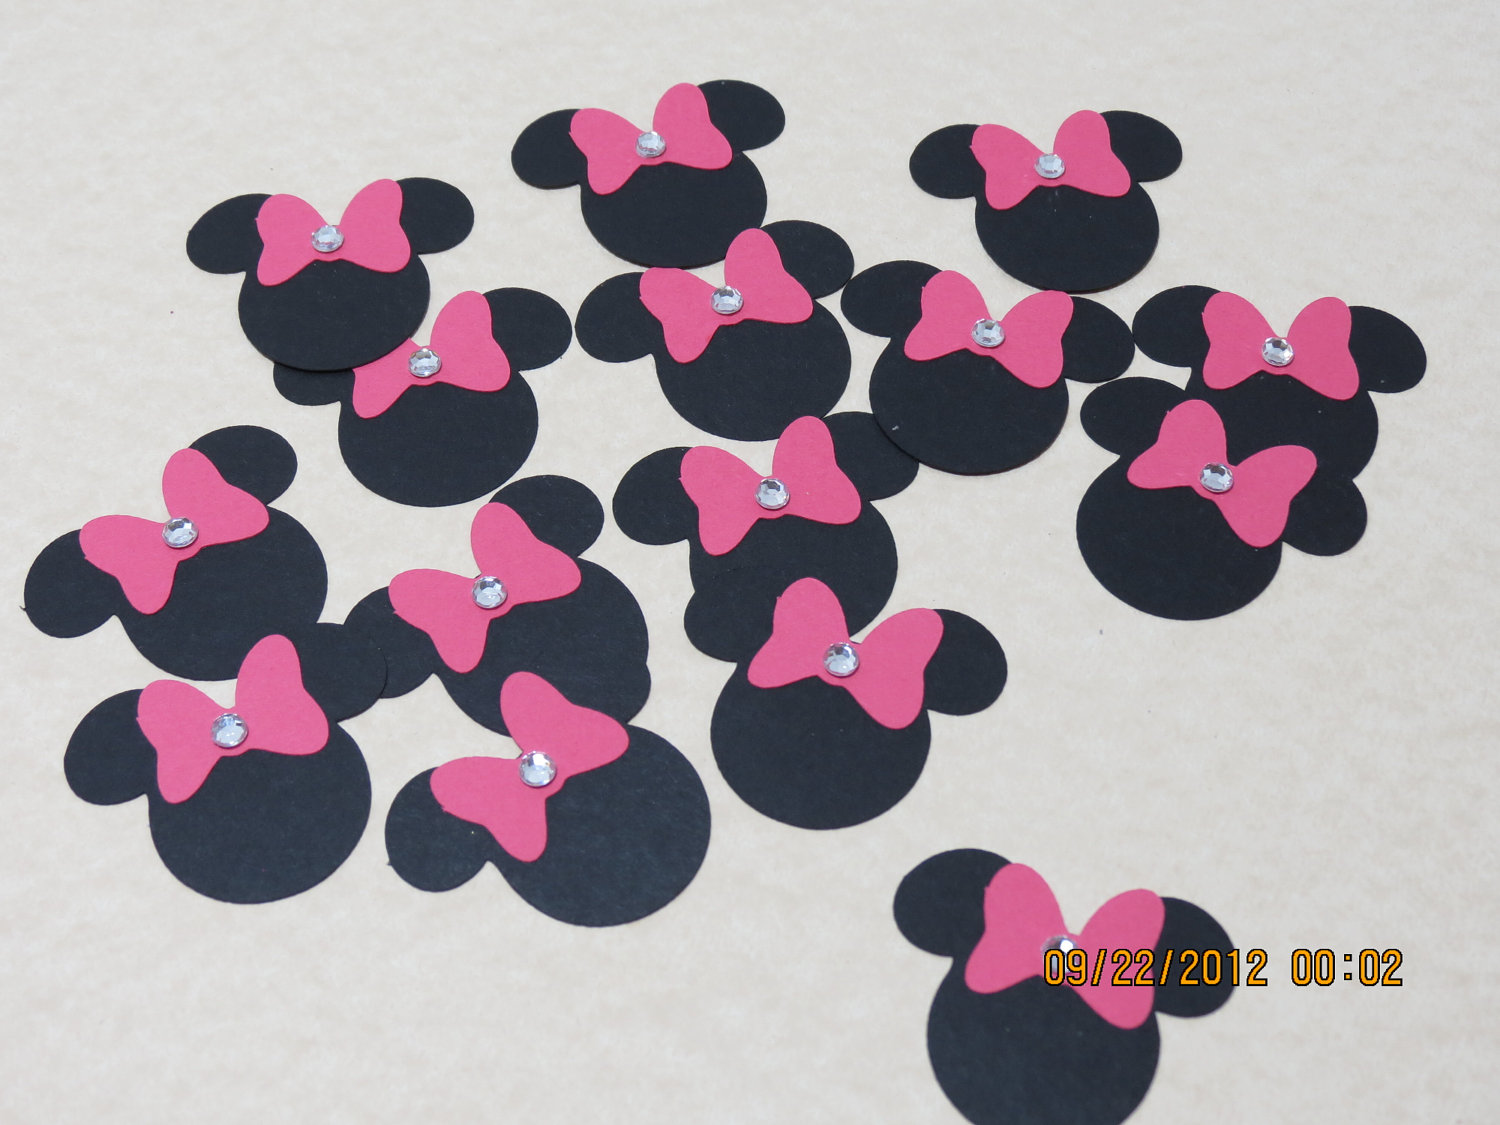 Popular items for minnie silhouette on Etsy